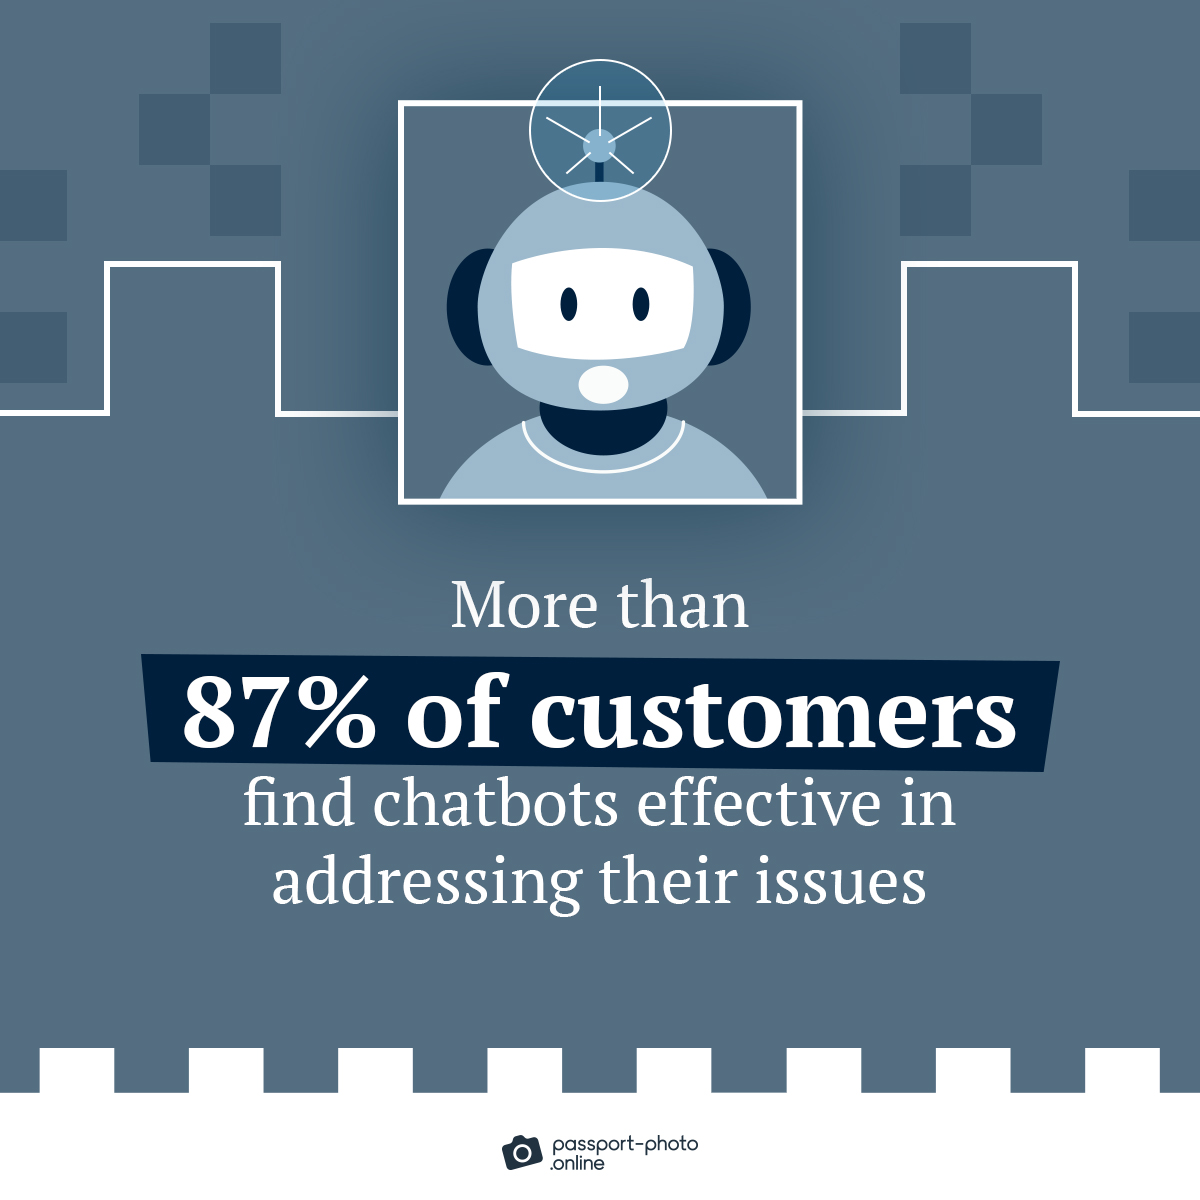 over 87% of customers find chatbots effective in addressing their issues